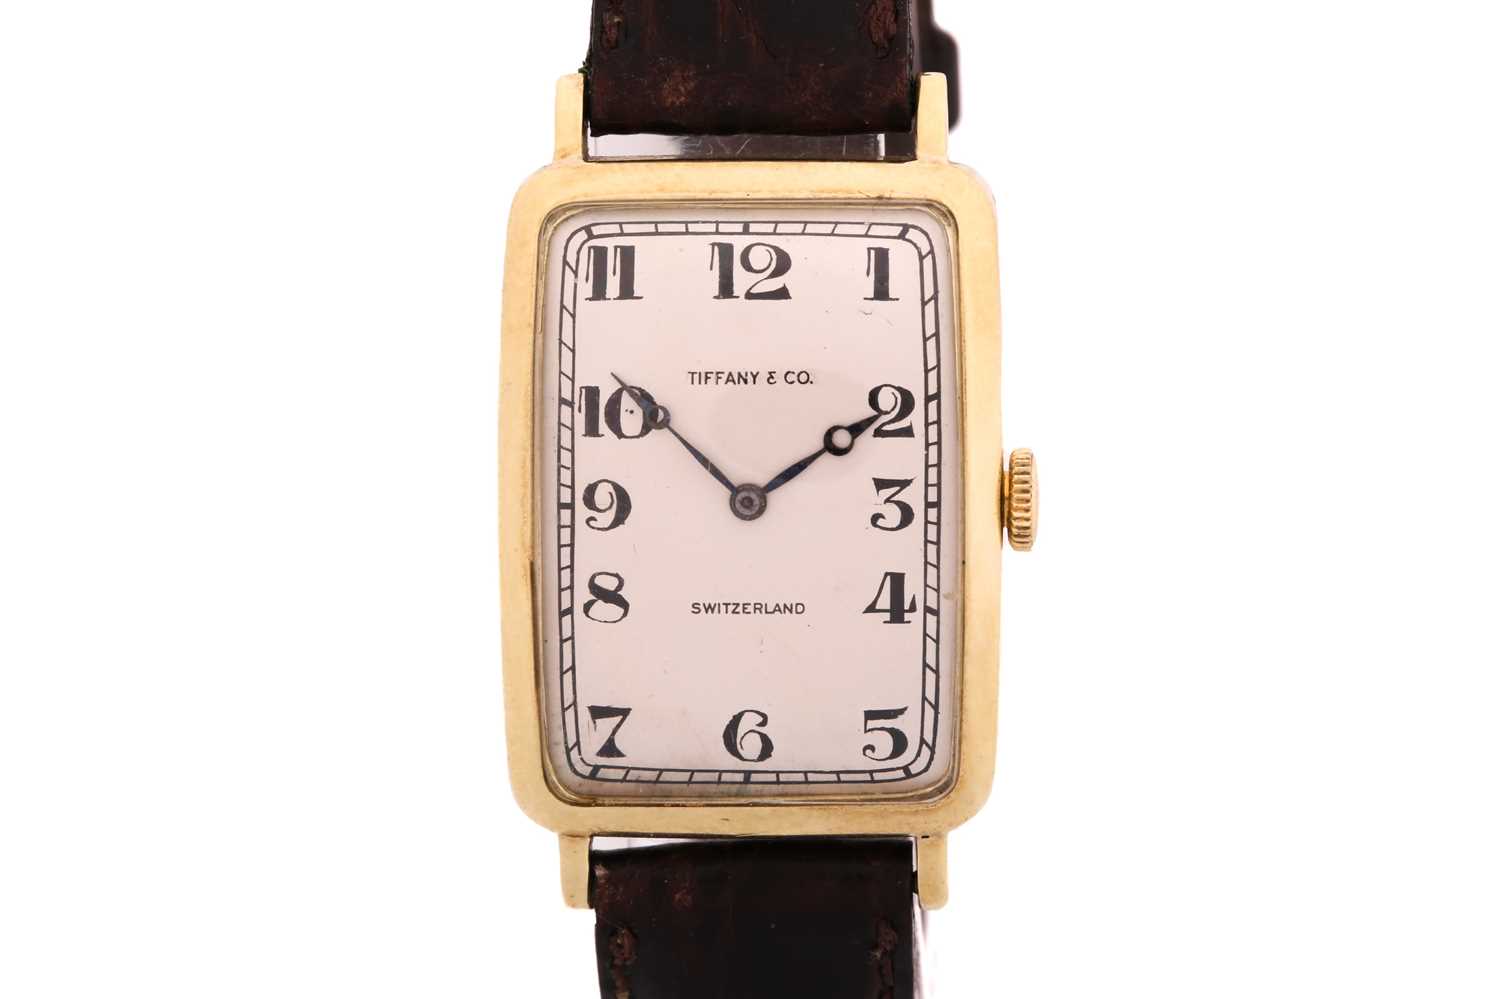 A Gentlemen's Tiffany and Co. wristwatch with a Longines watch co. hand-wound Swiss-made movement in - Image 2 of 6